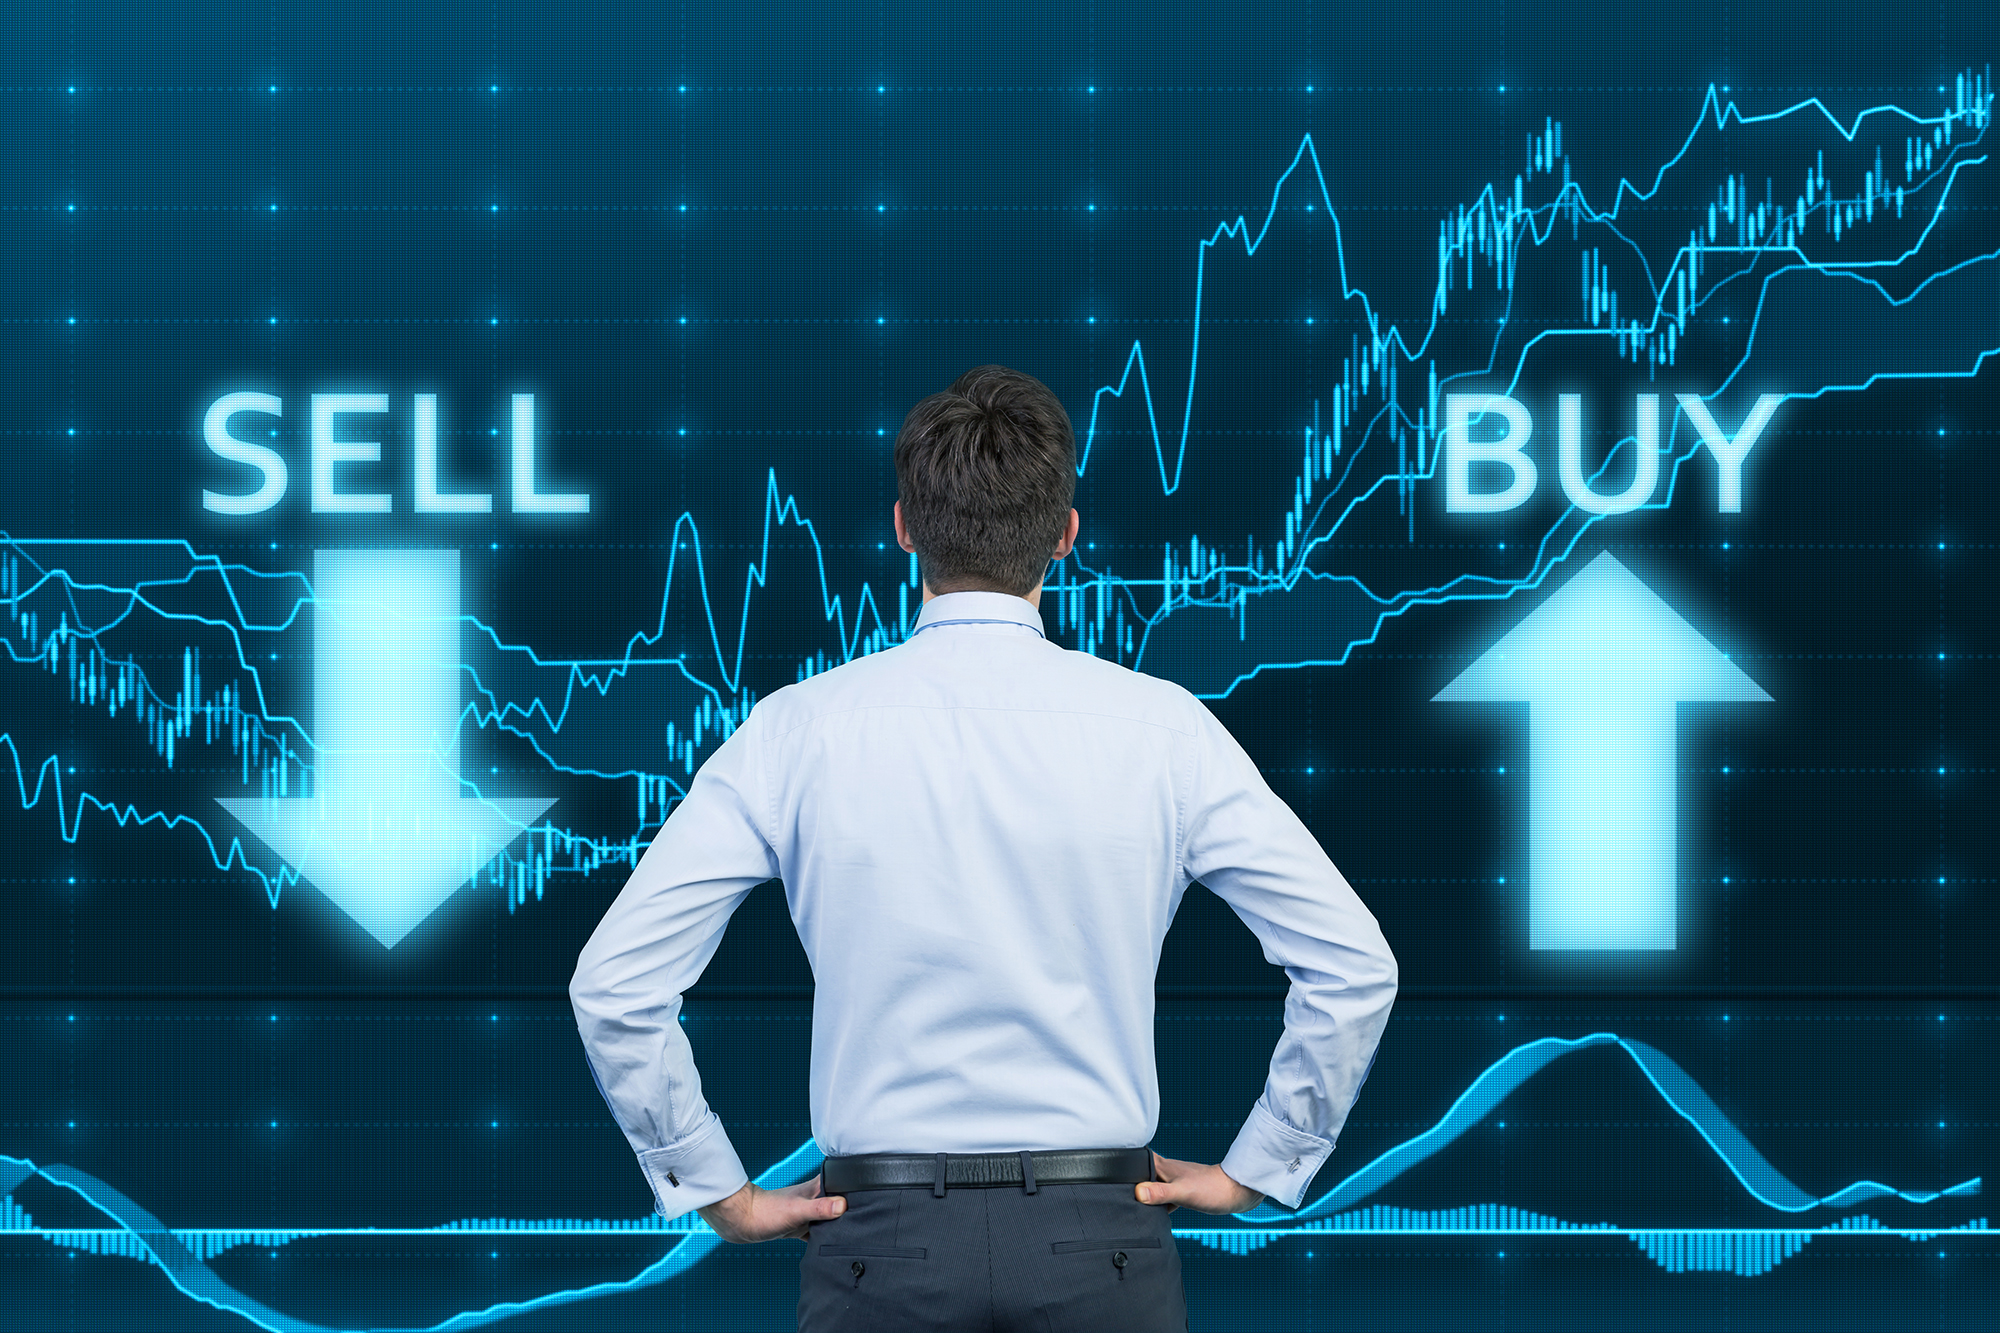 Man deciding whether to buy or sell shares. (Image: Shutterstock)